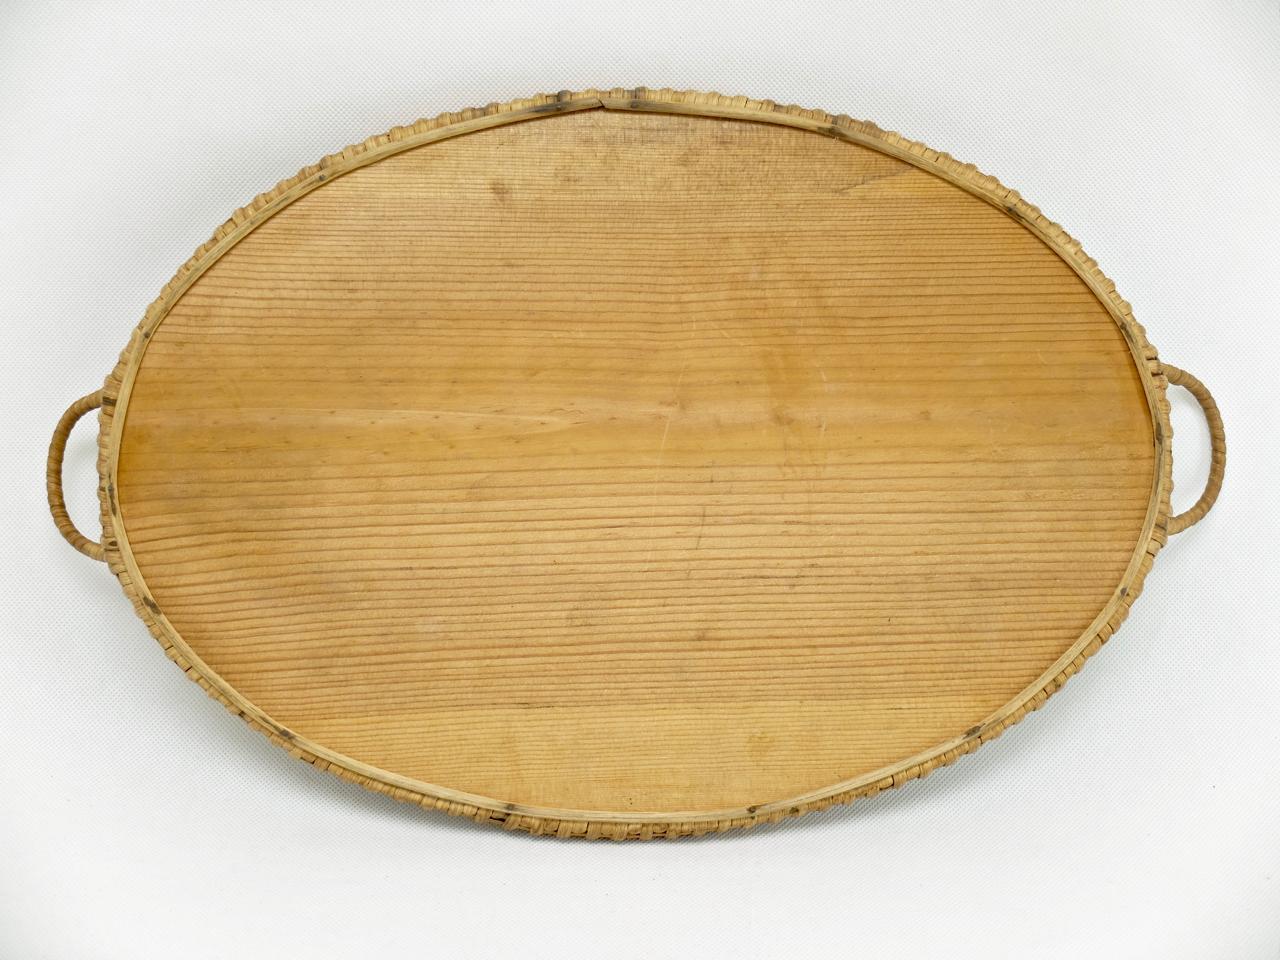 Cold-Painted Oval Art Nouveau Tray with Mother of Pearl, Inlays For Sale